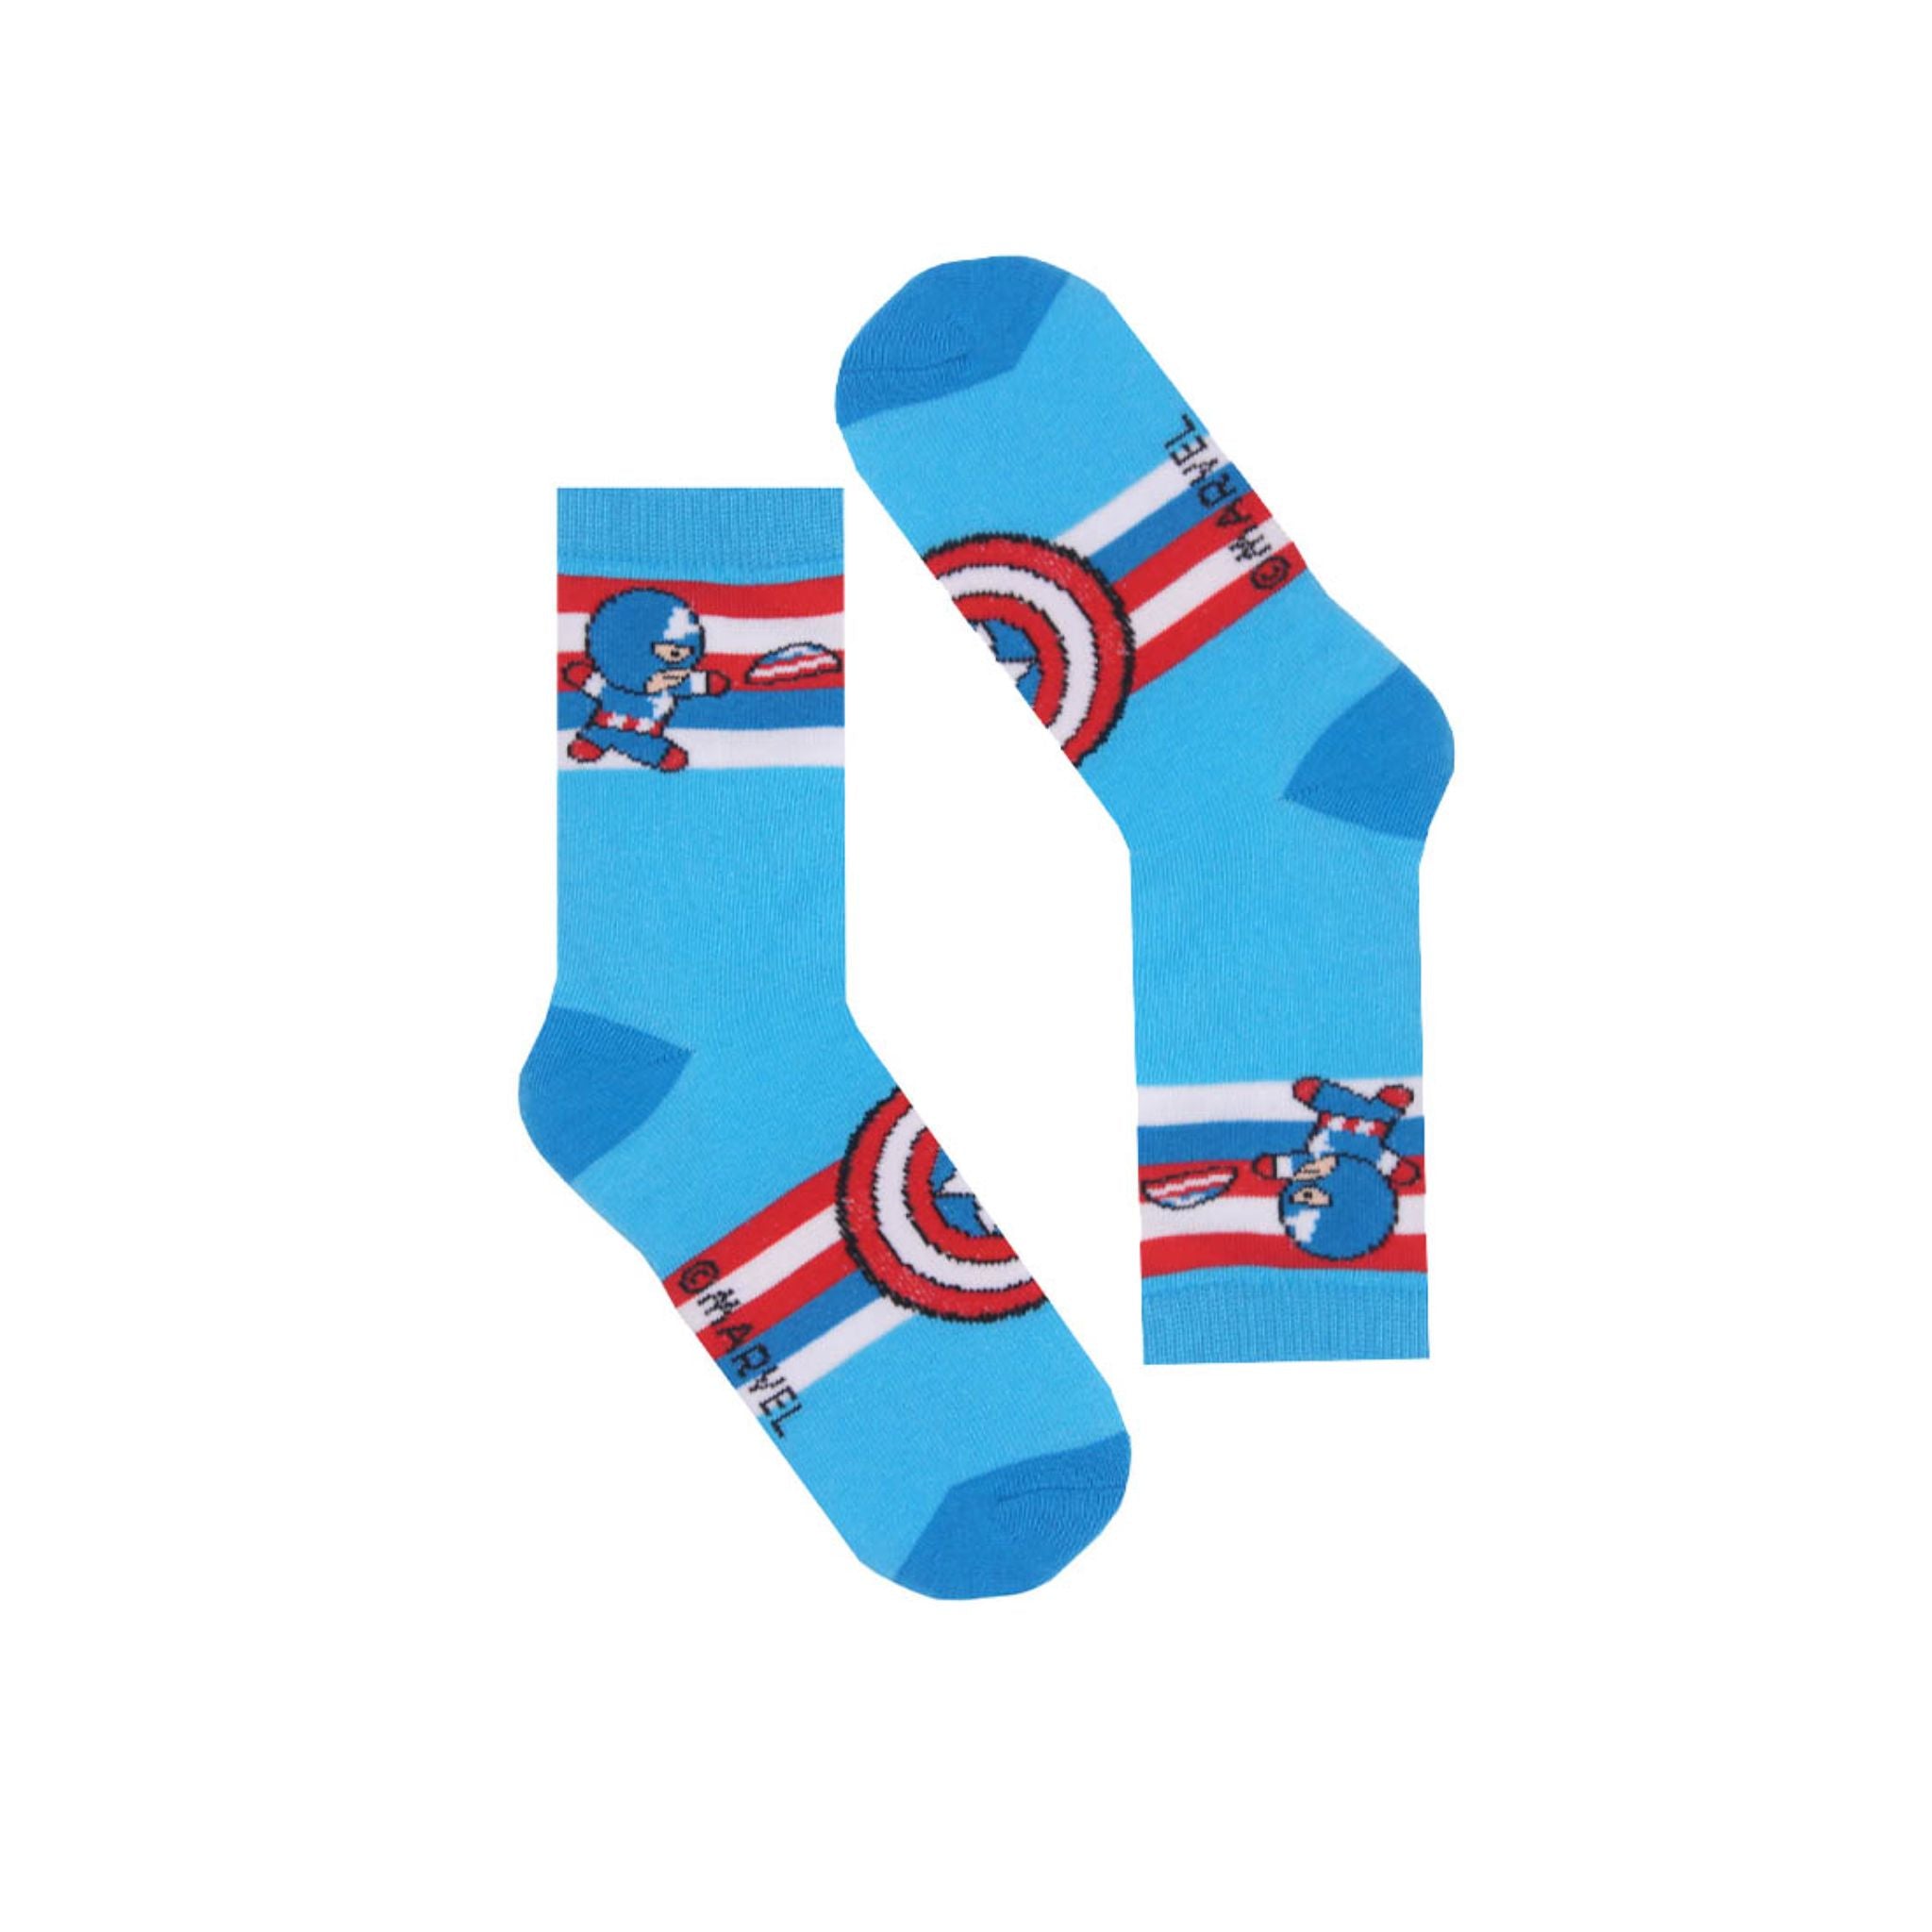 RAD RUSSEL Captain America Kids Socks - Ages 2 to 7 - Blue